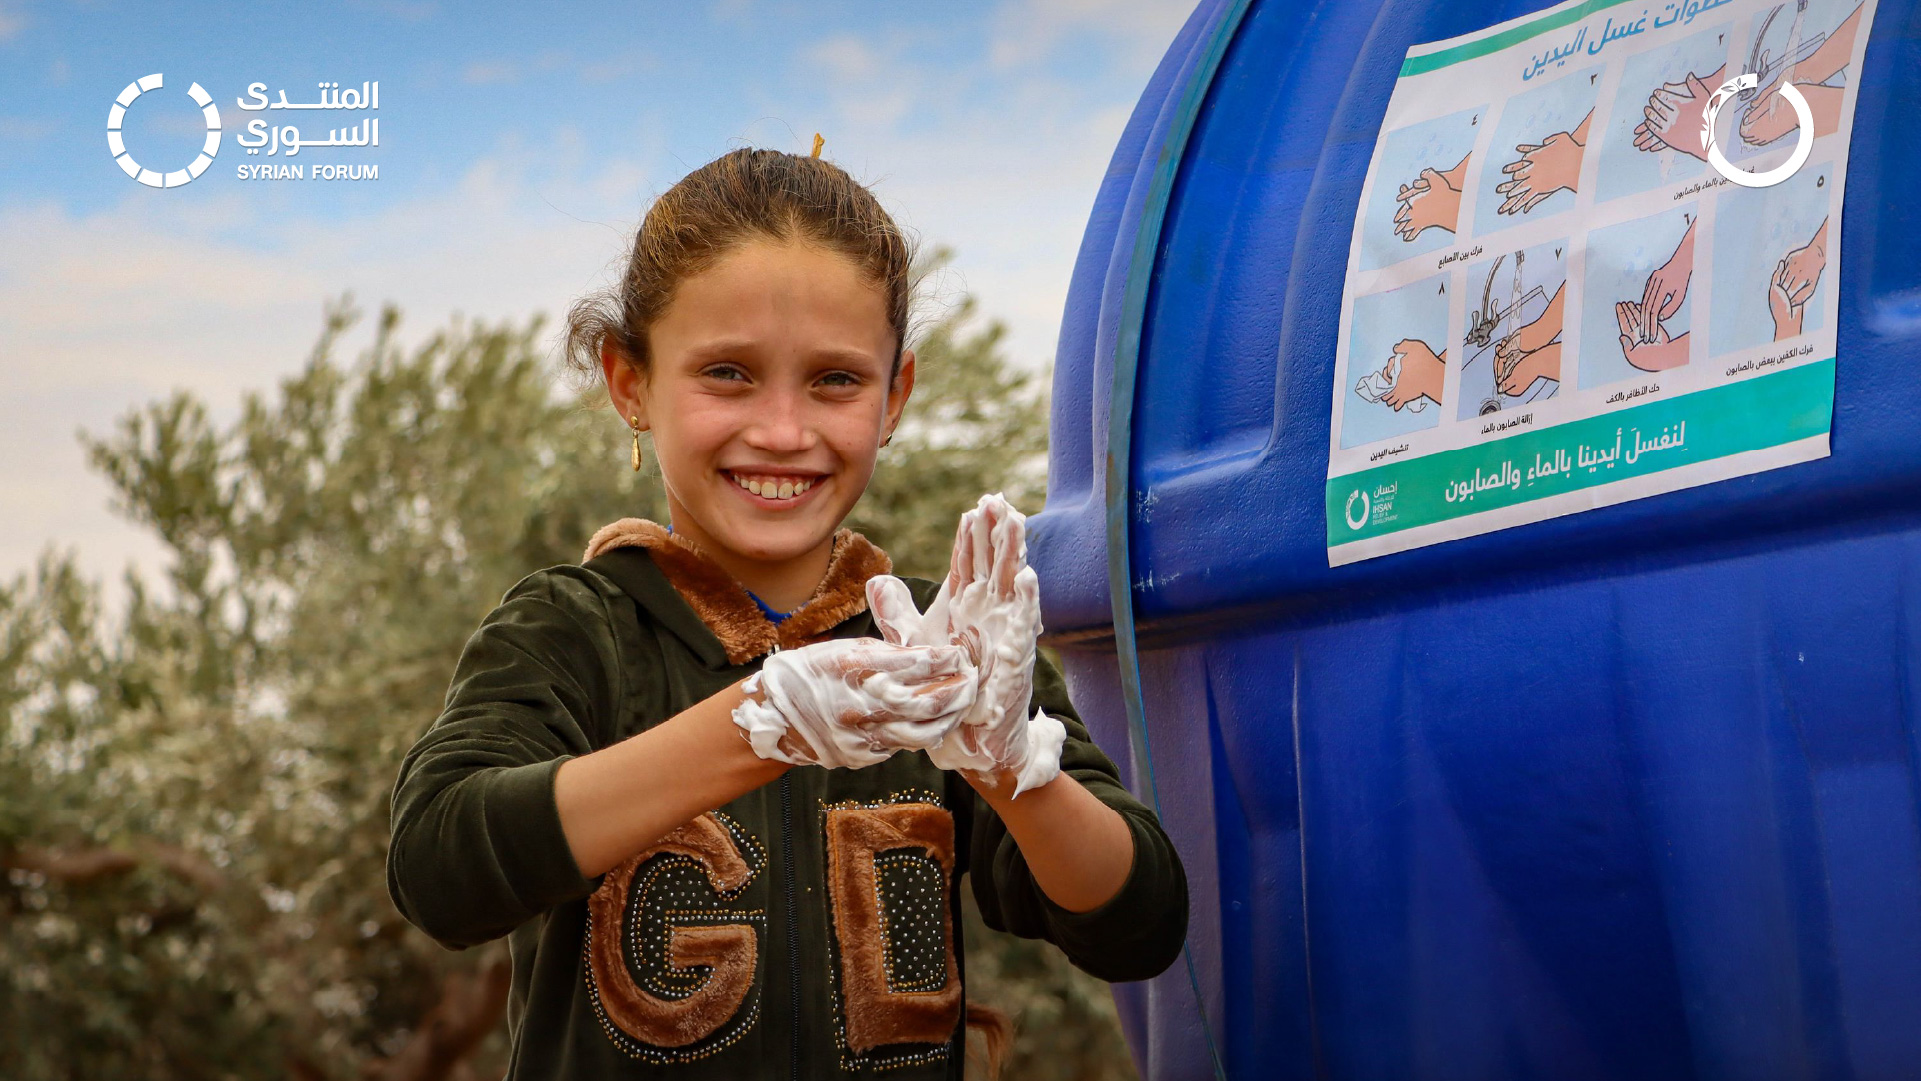 Promoting Handwashing Culture: Activities for Children in Northwest Syria Camps on World Handwashing Day